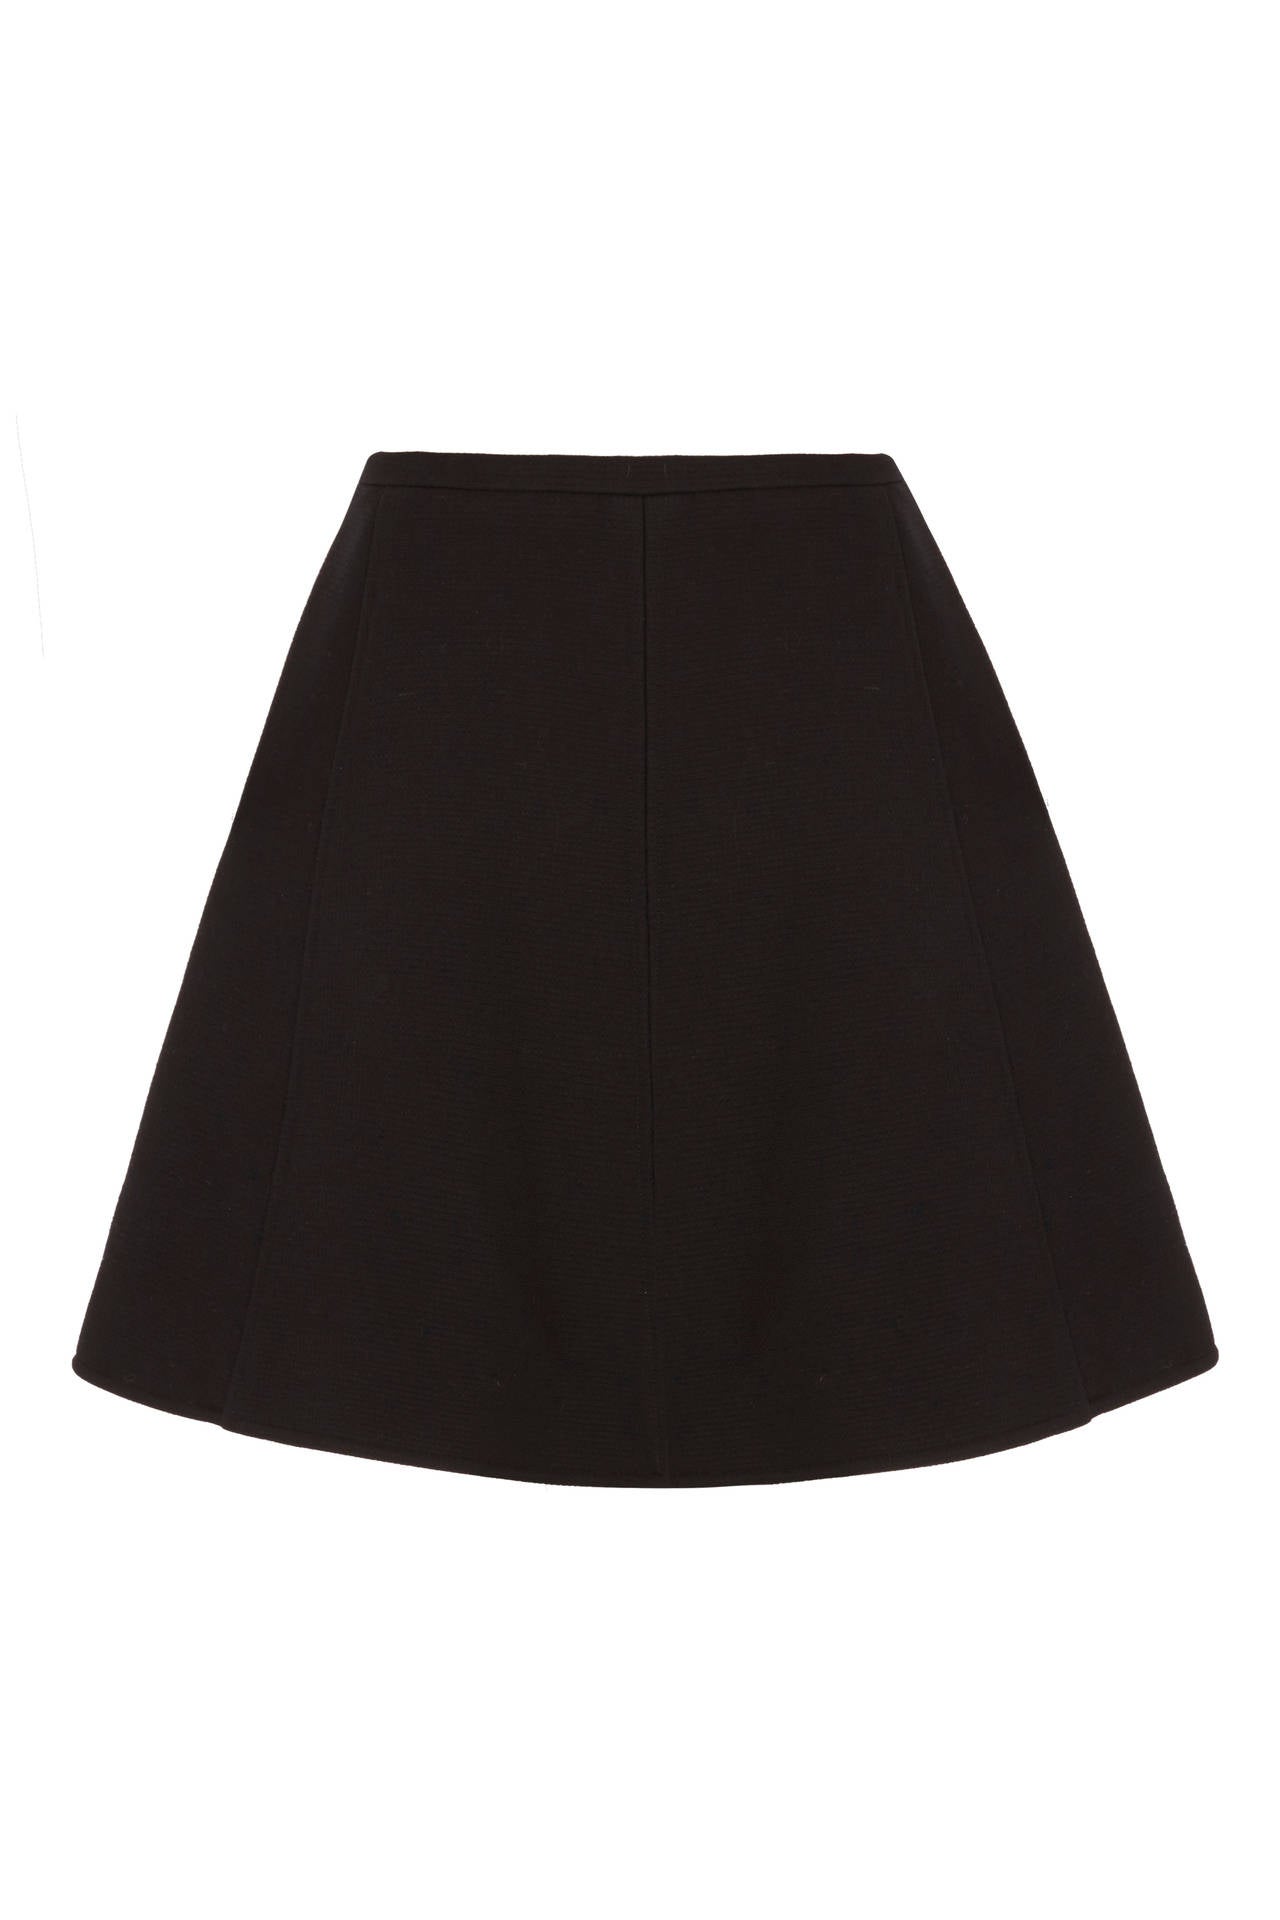 Fantastic 1960s black wool mini skirt by Courrege For Harrods.  This pieces features off centre fastening with gold buttons and a cute side pocket detail also with gold button to fasten.  It is fully lined in an ivory silk lining and is in excellent